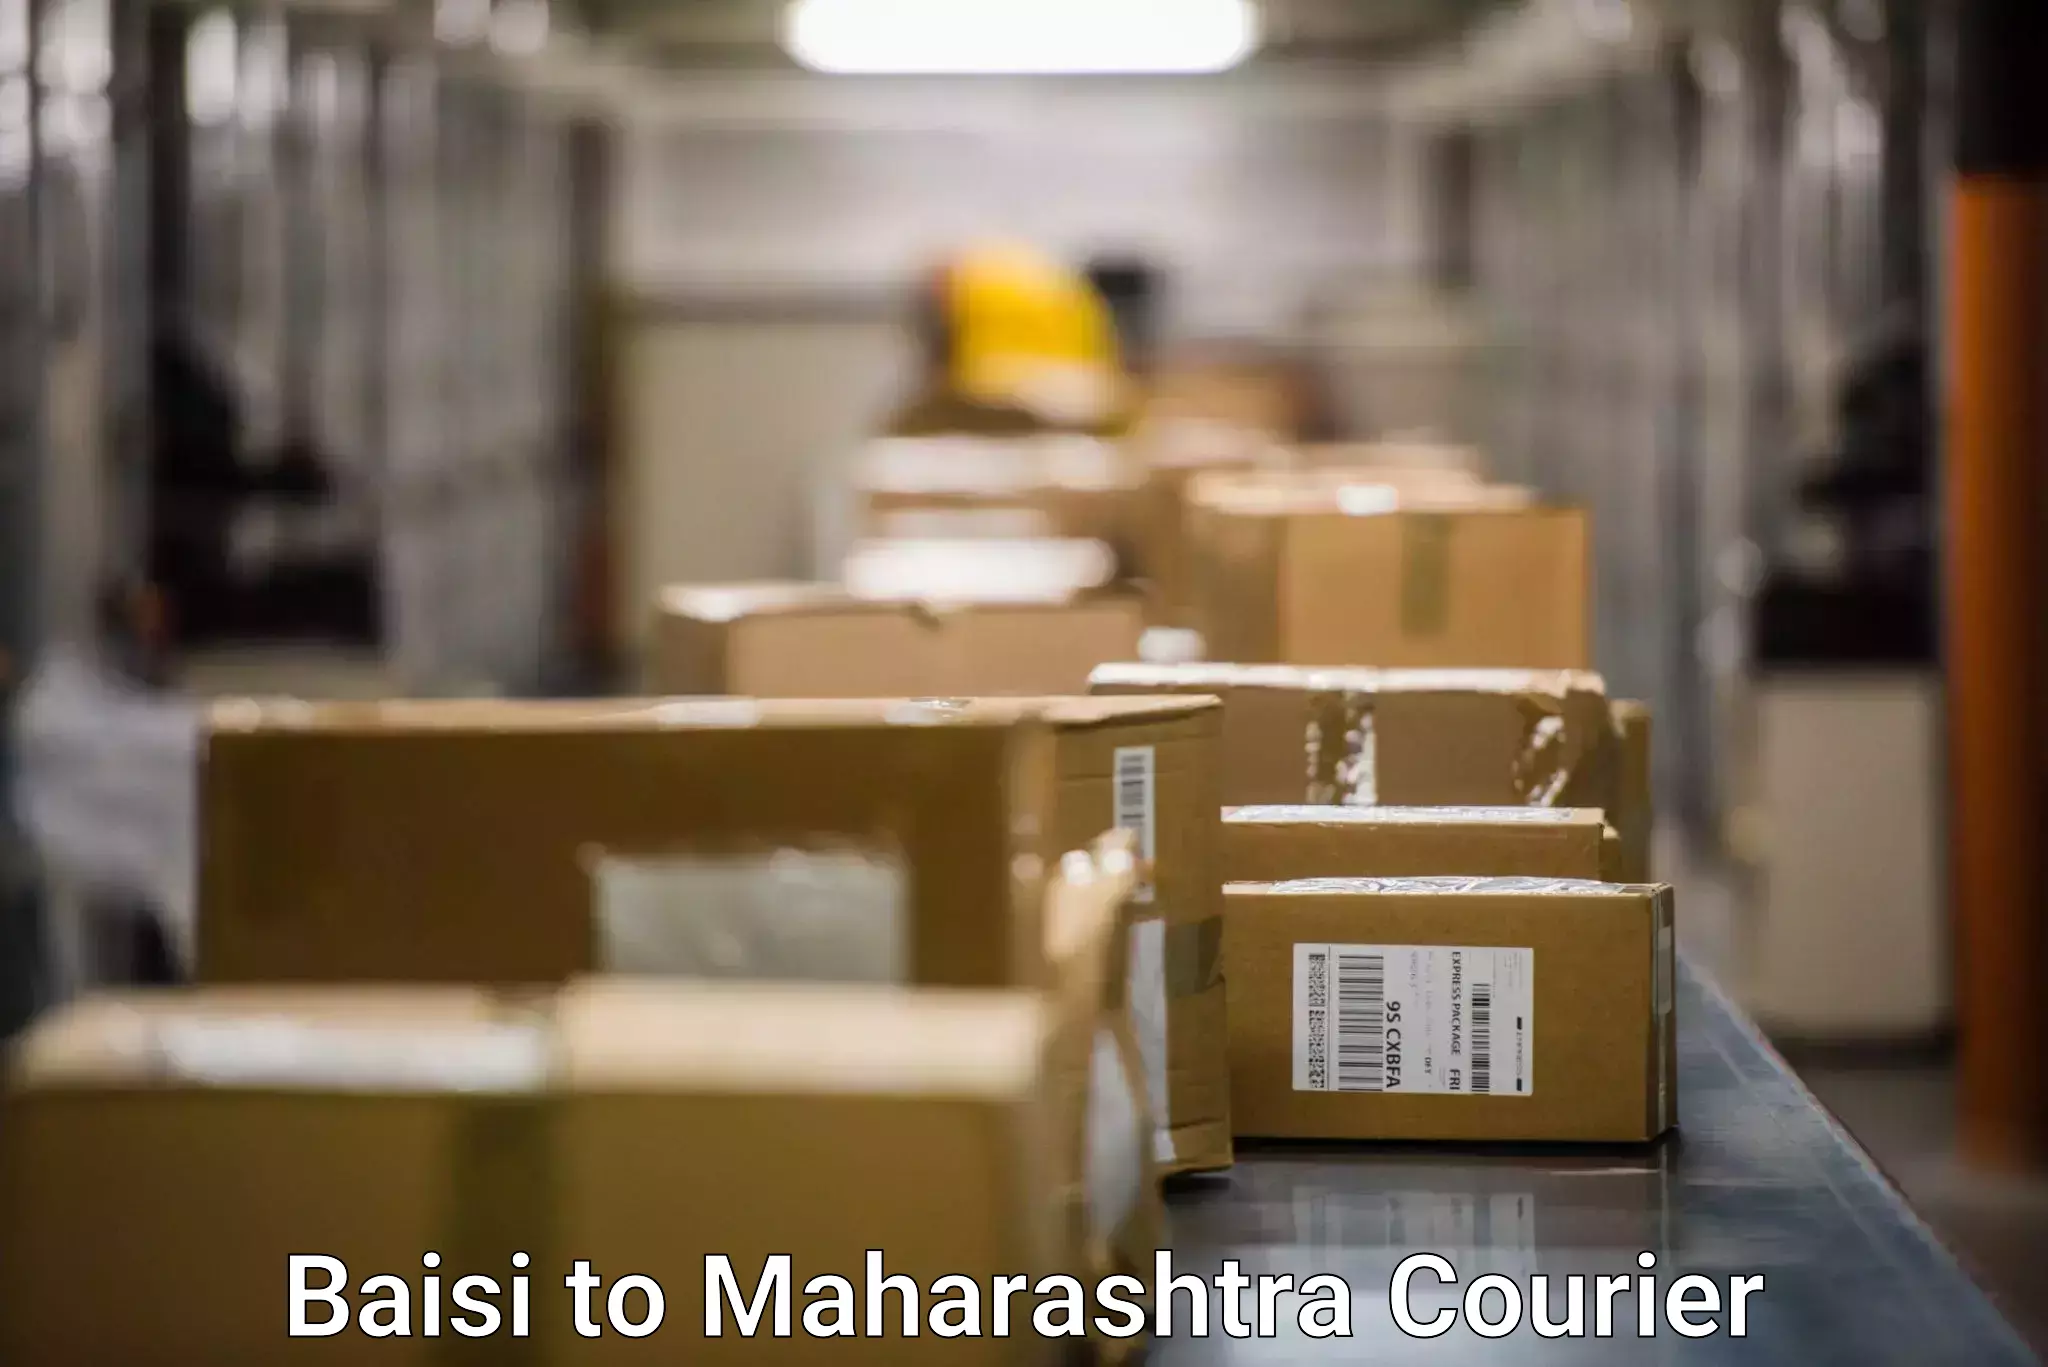 Expedited parcel delivery in Baisi to Maharashtra